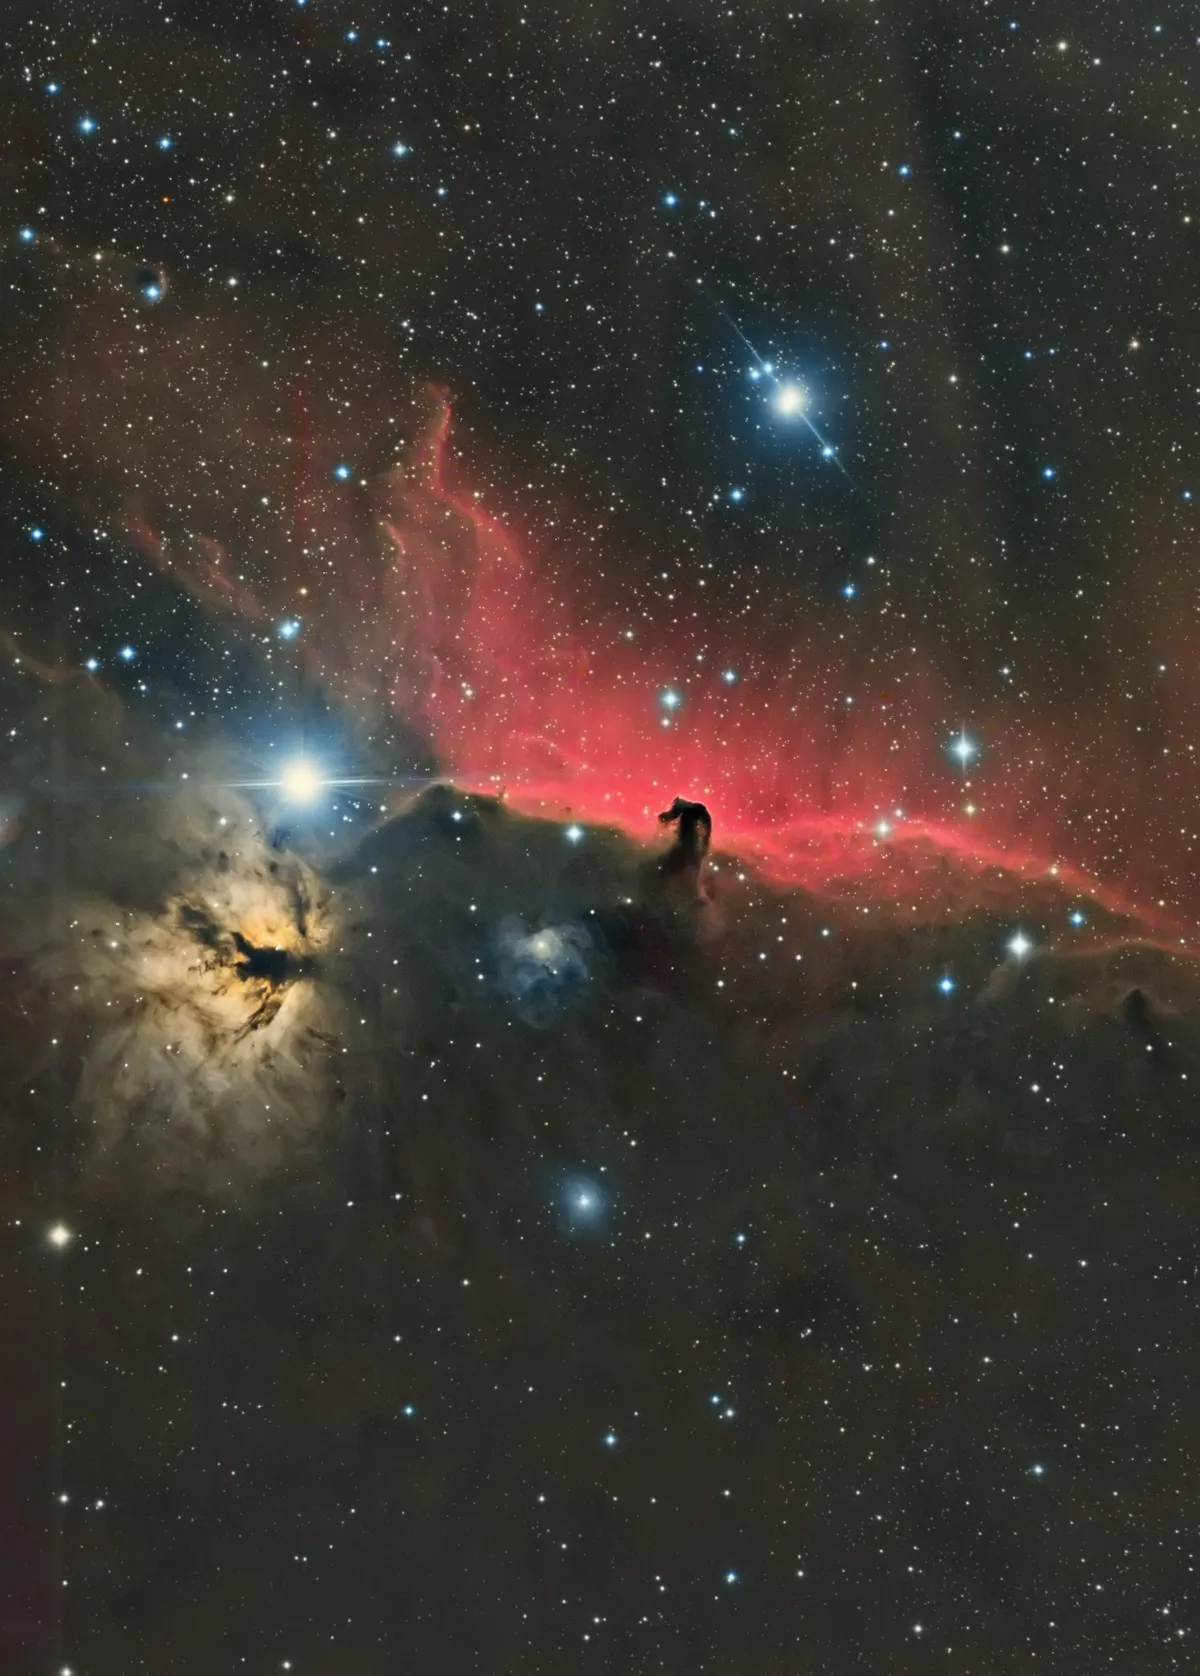 The Horsehead Nebula by Rafael Compassi, Presidente Lucena, Brazil. Equipment: 80mm F/5 Triplet APO, QHY9m, 36mm Baader filters.